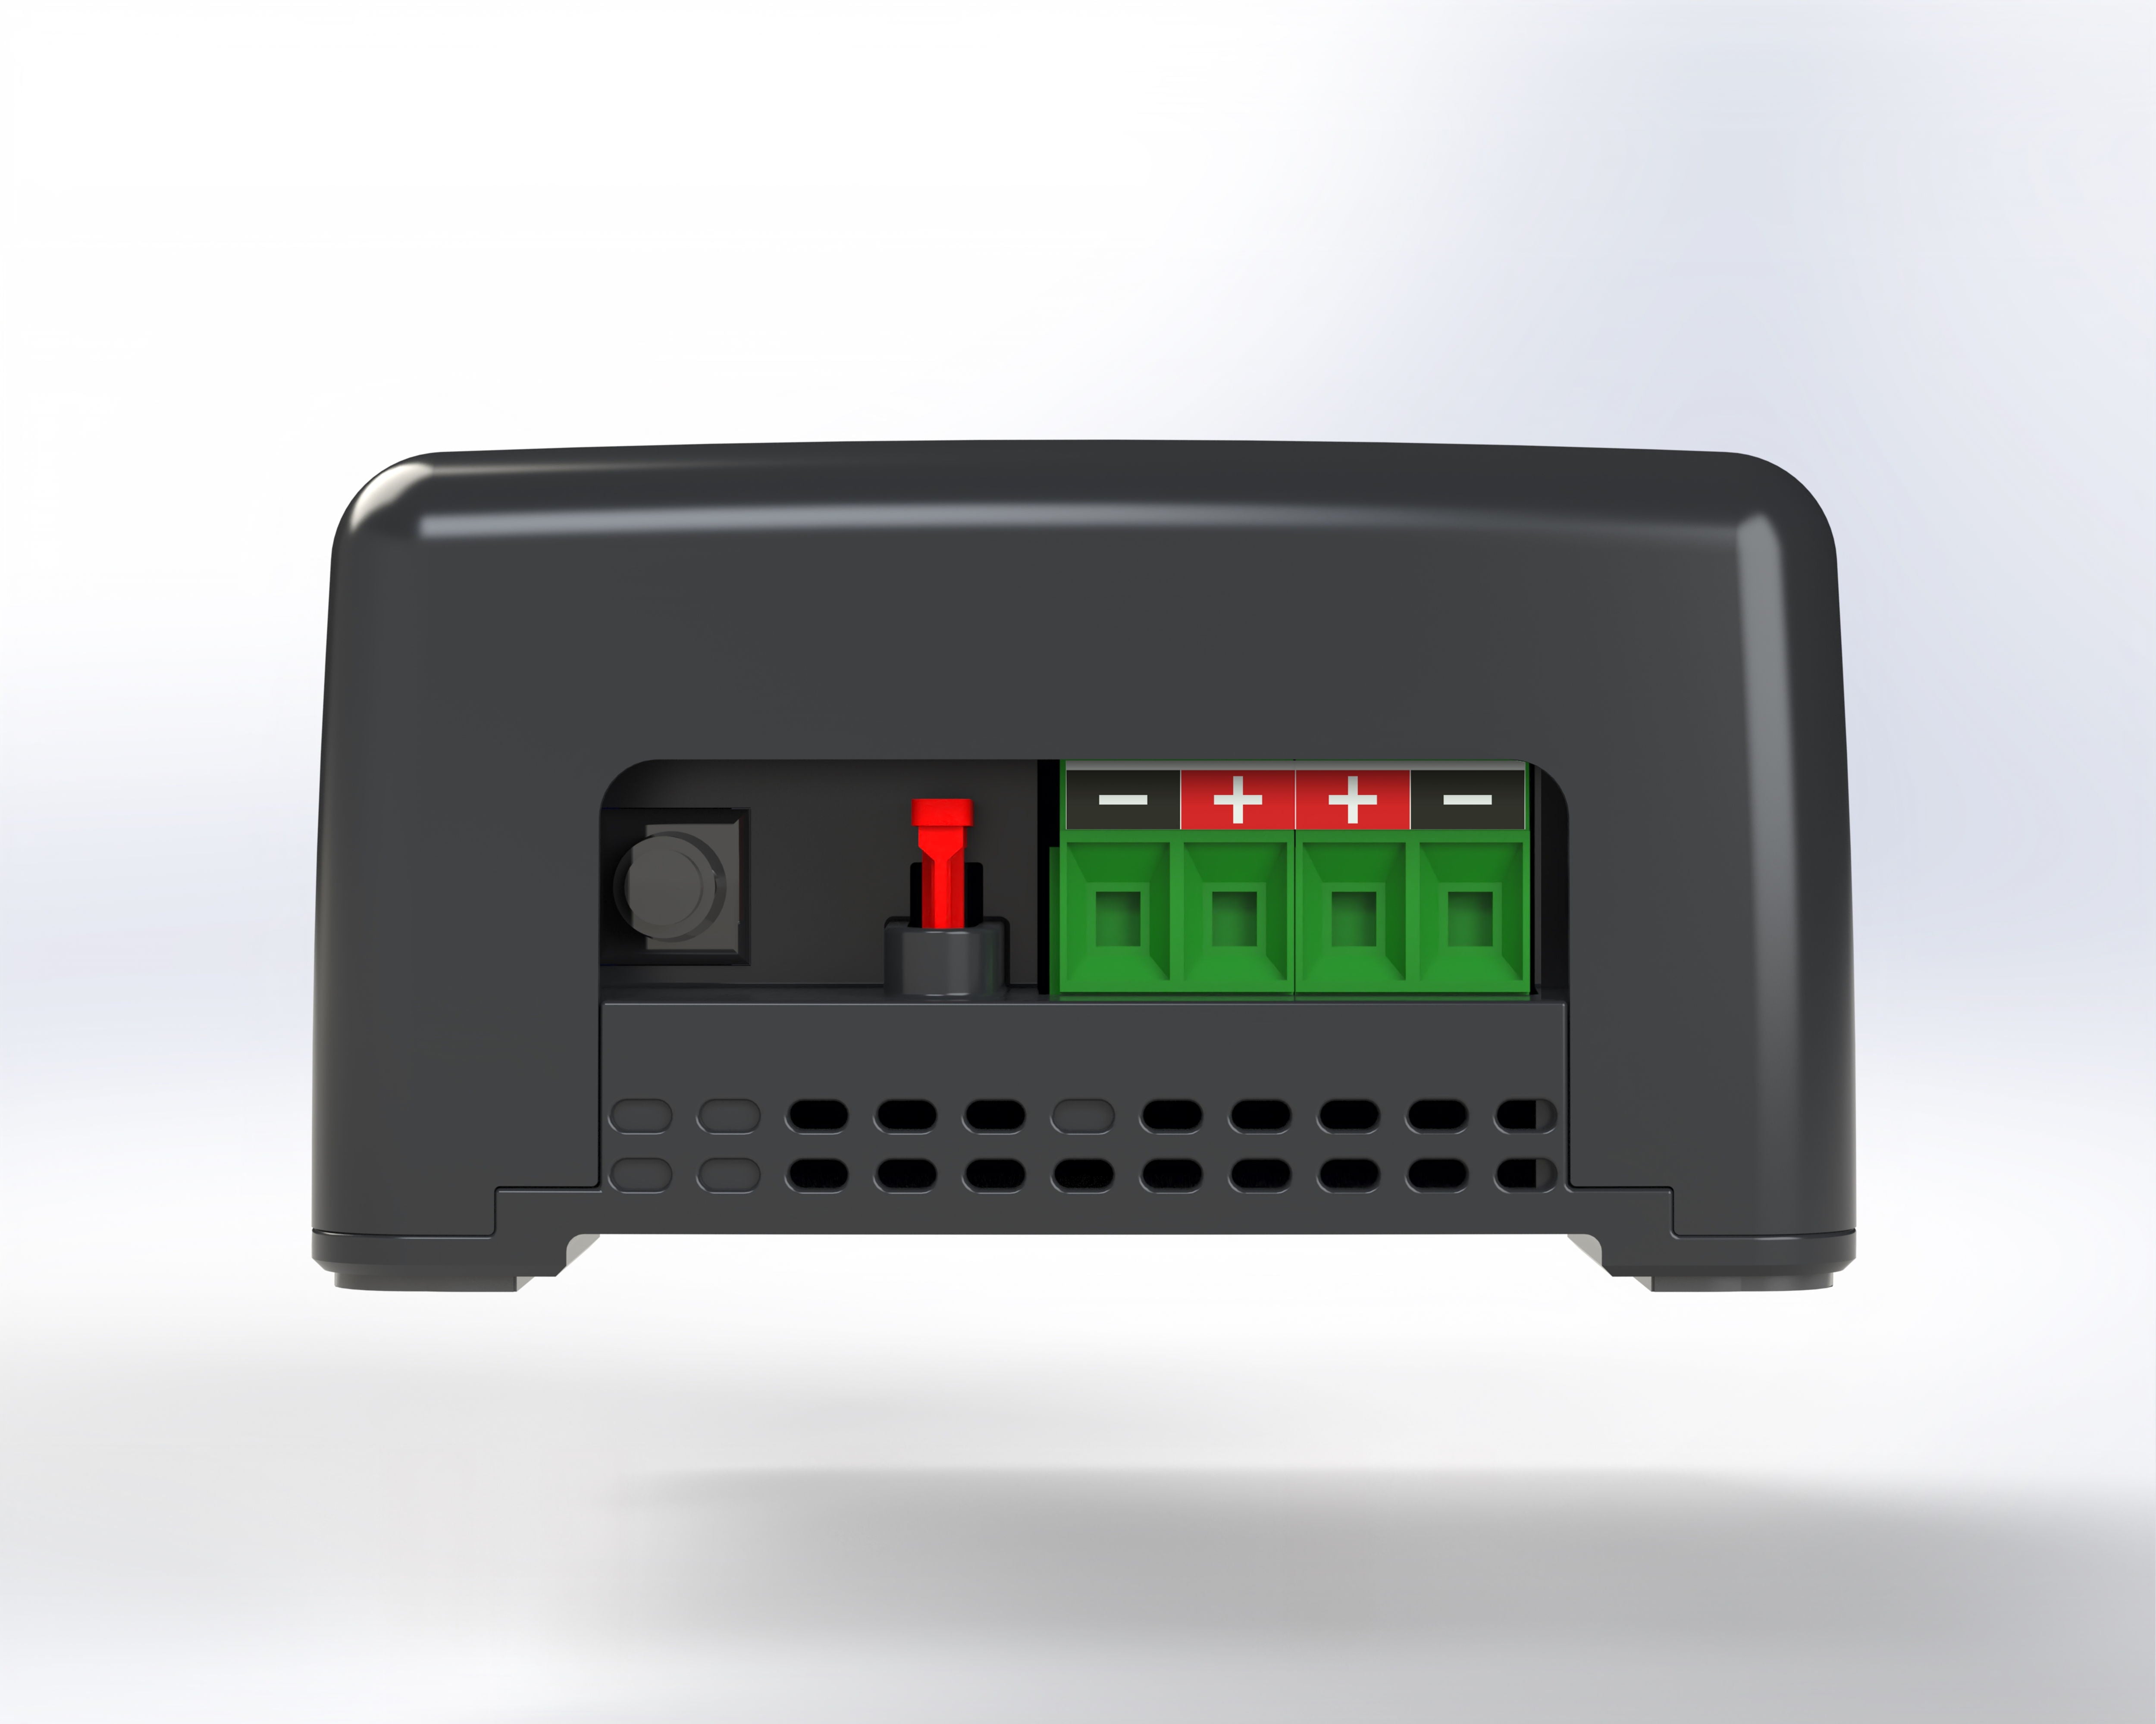 Battery and Charger Analyser (BACA) 12V 25A - USB A - Valen